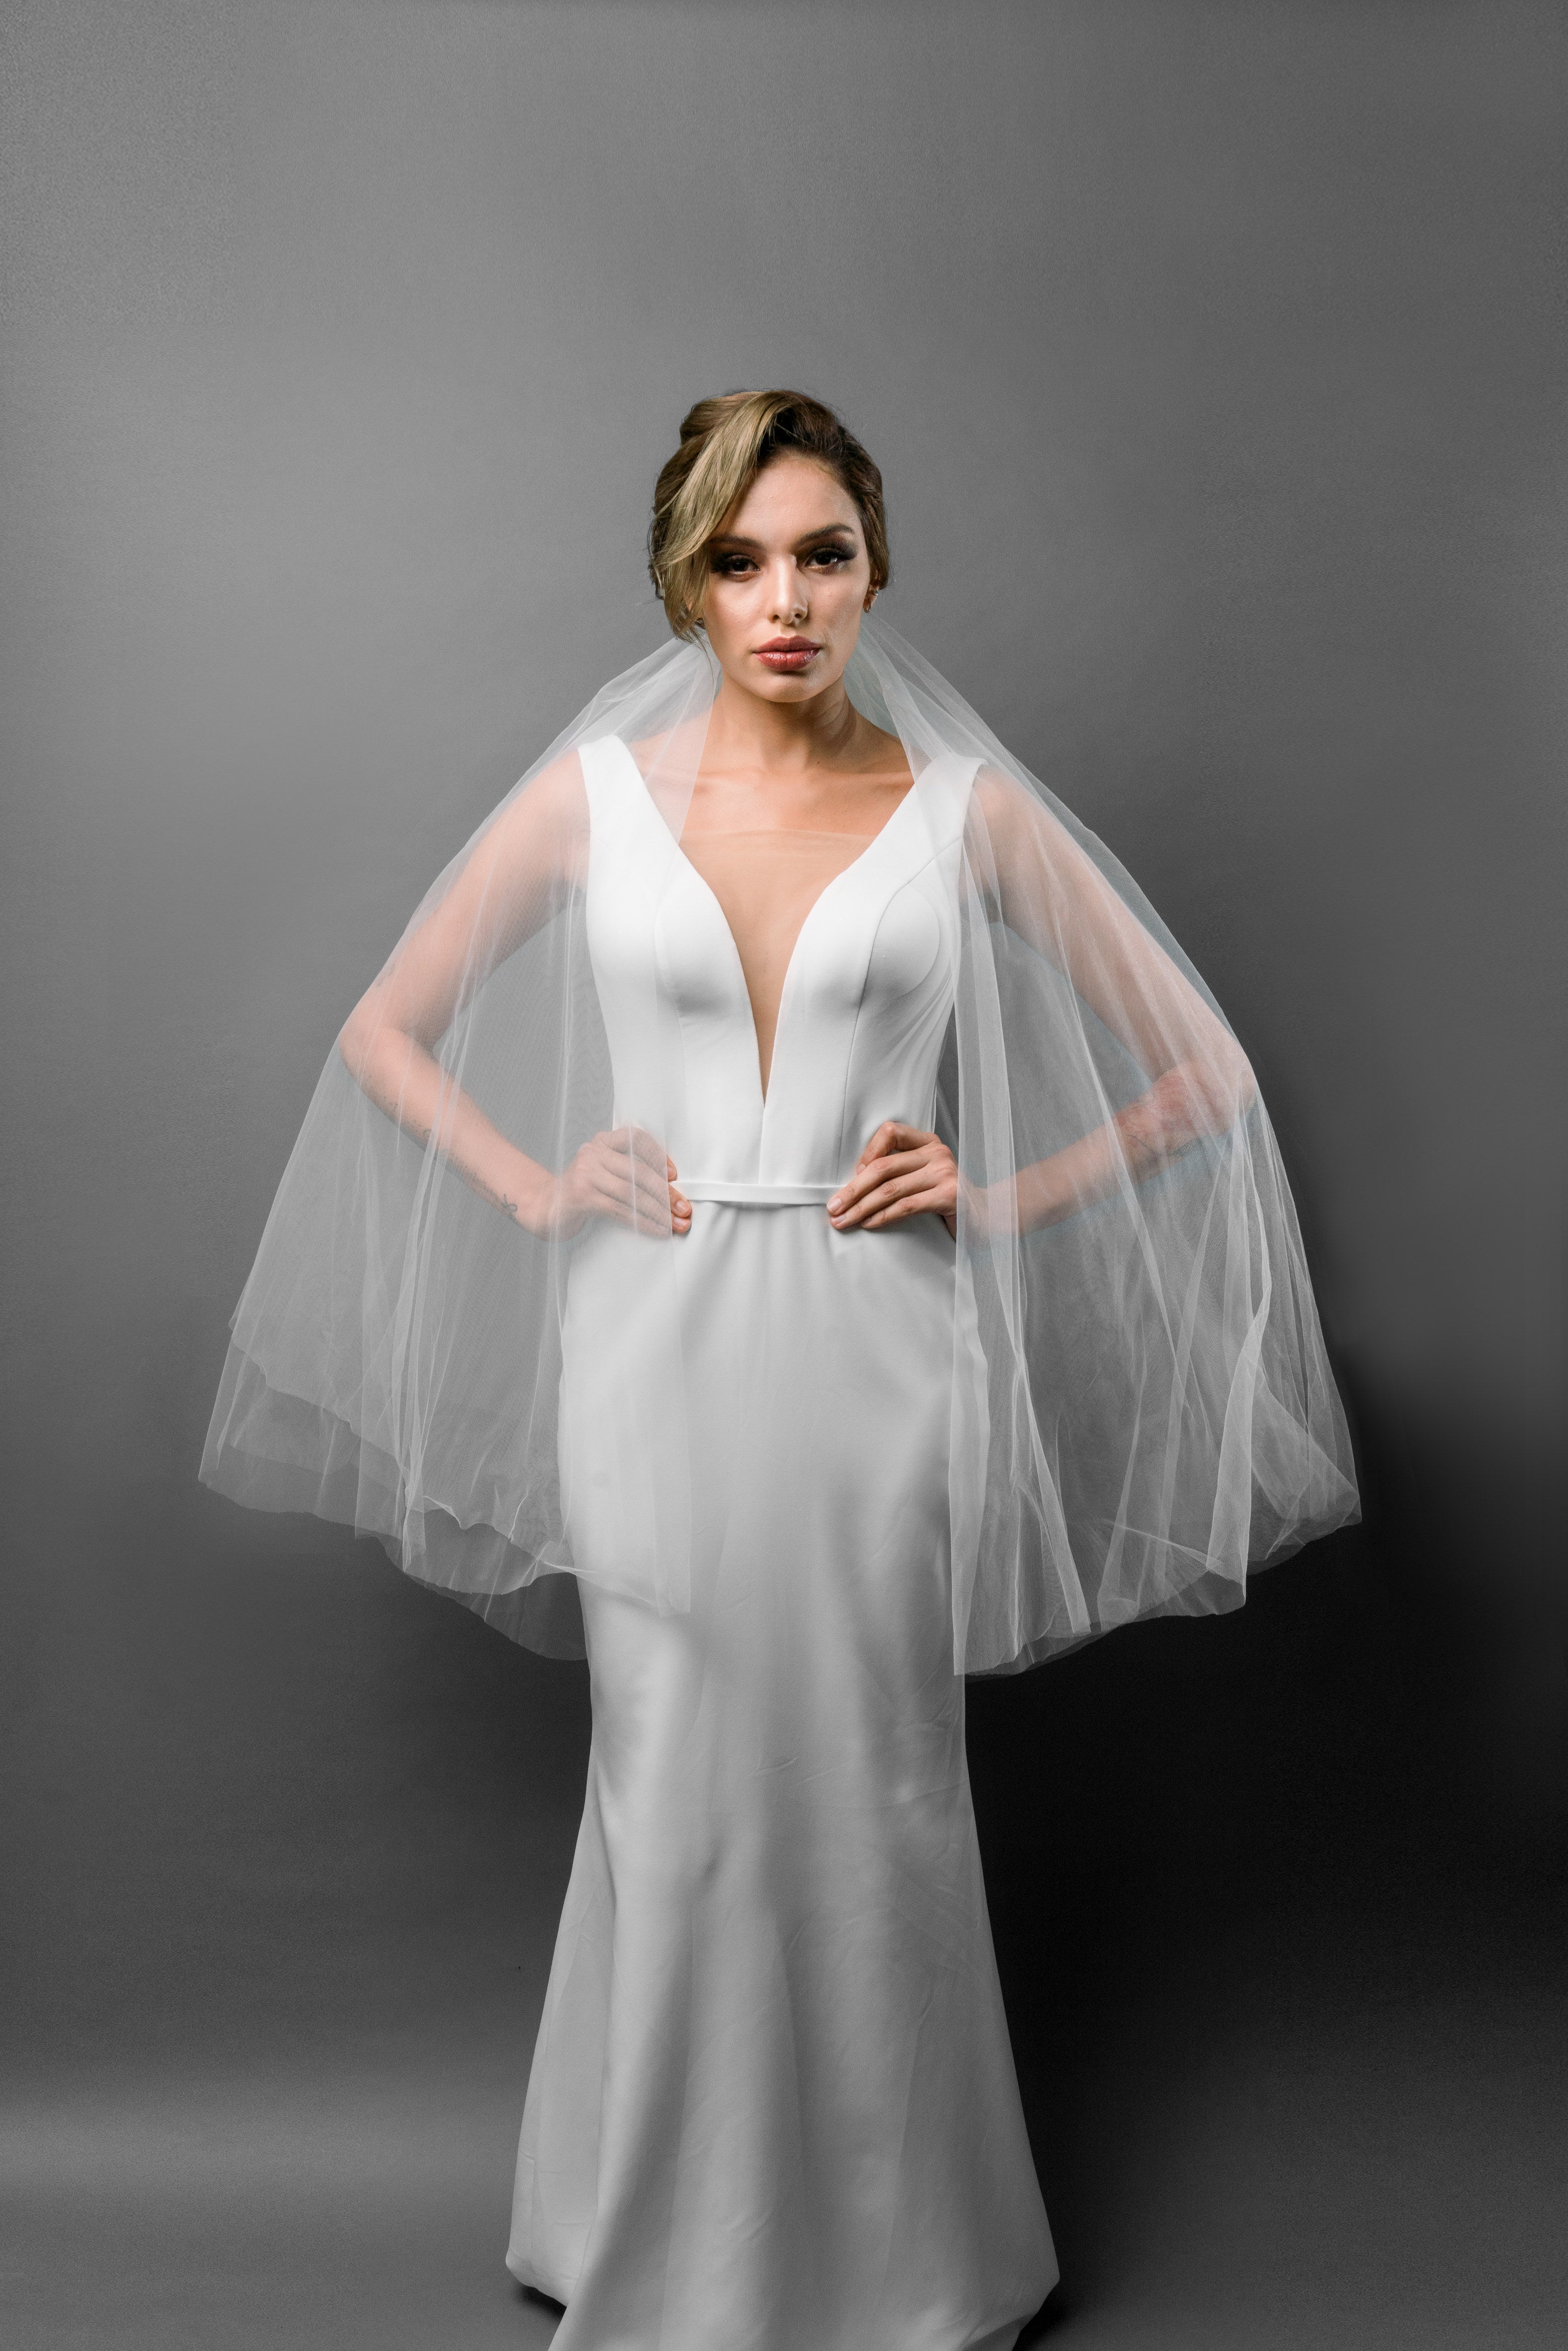 Simple 2 Tier Drop Wedding Veil with Blusher - Available in Different Lengths - Maxima Bridal